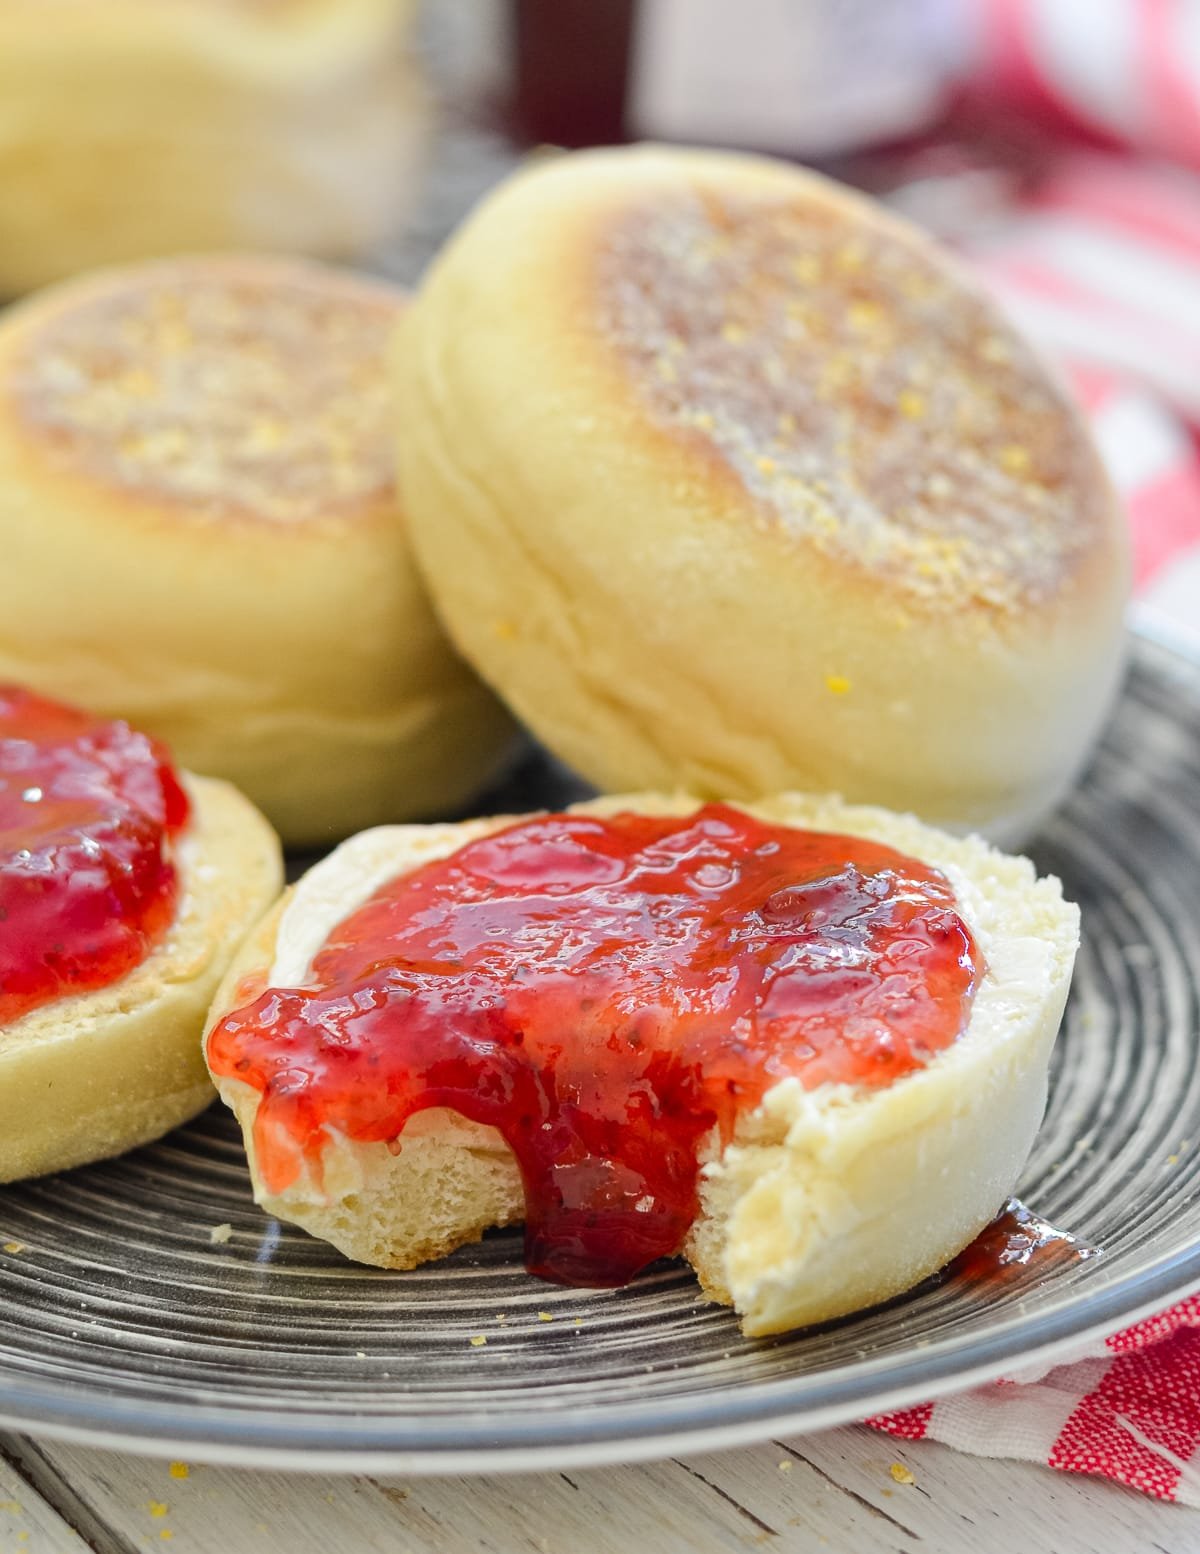 an English muffin half covered in jam with a bite taken out.